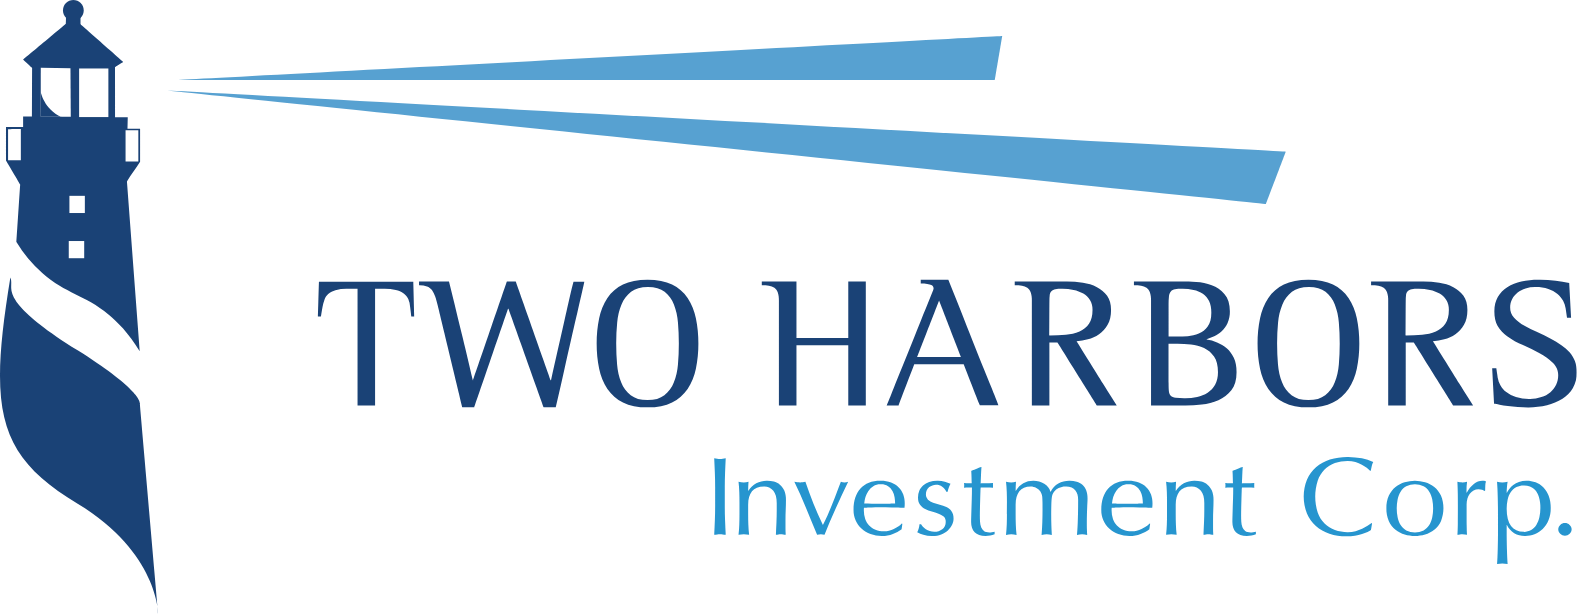 Two Harbors Investment
 logo large (transparent PNG)